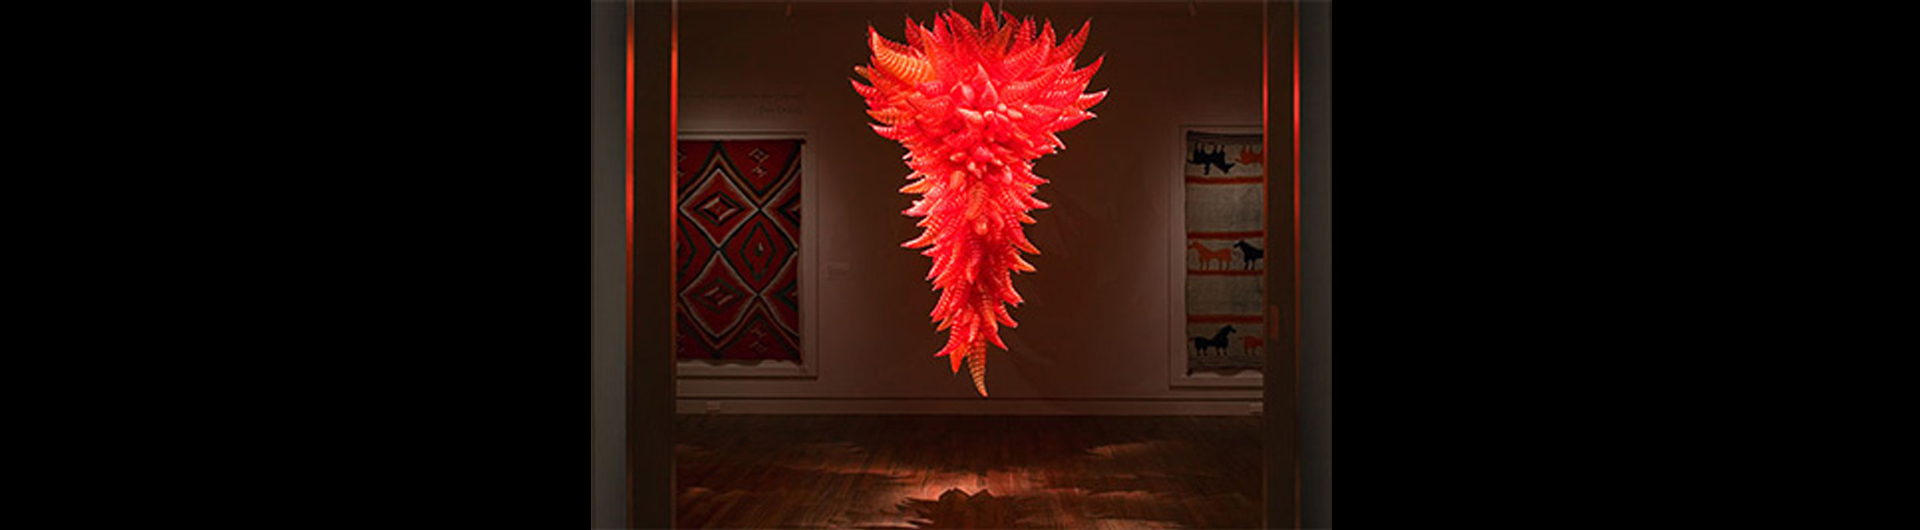 Native American Art and Dale Chihuly Orange Hornet Chandelier